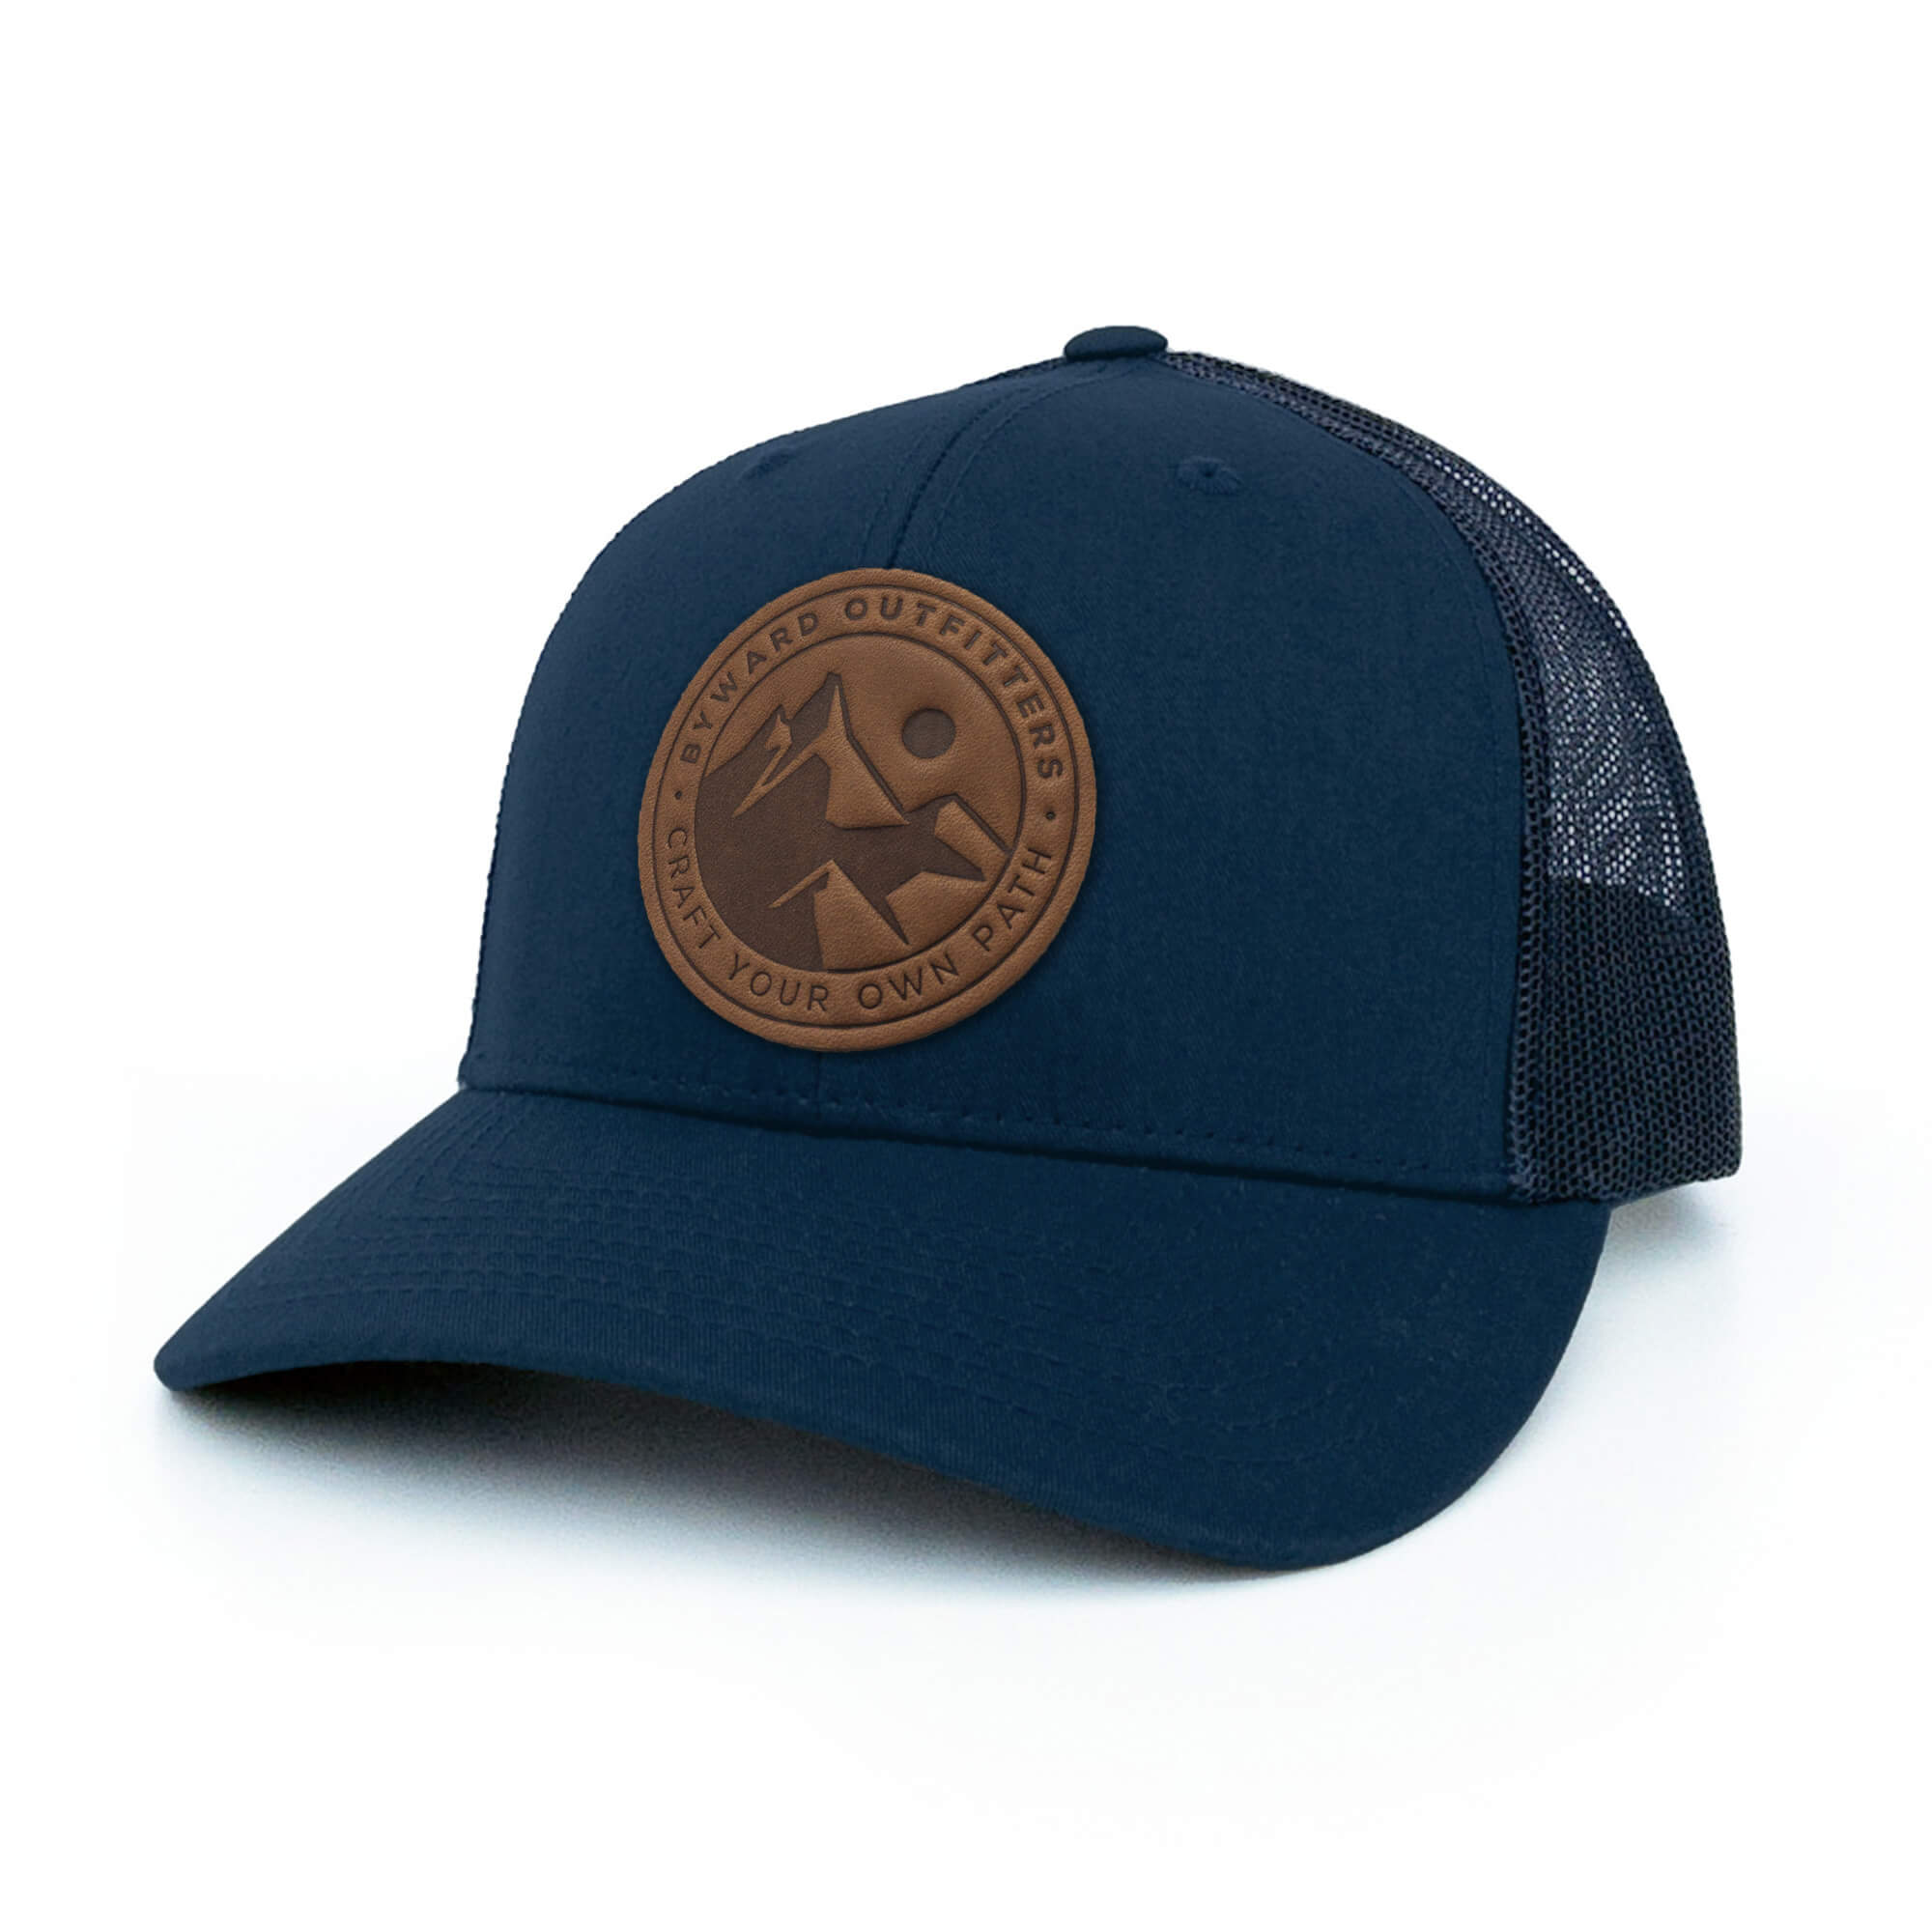 Navy trucker hat with full-grain leather patch of a Mountain Escape | BLACK-005-005, CHARC-005-005, NAVY-005-005, HGREY-005-005, MOSS-005-005, BROWN-005-005